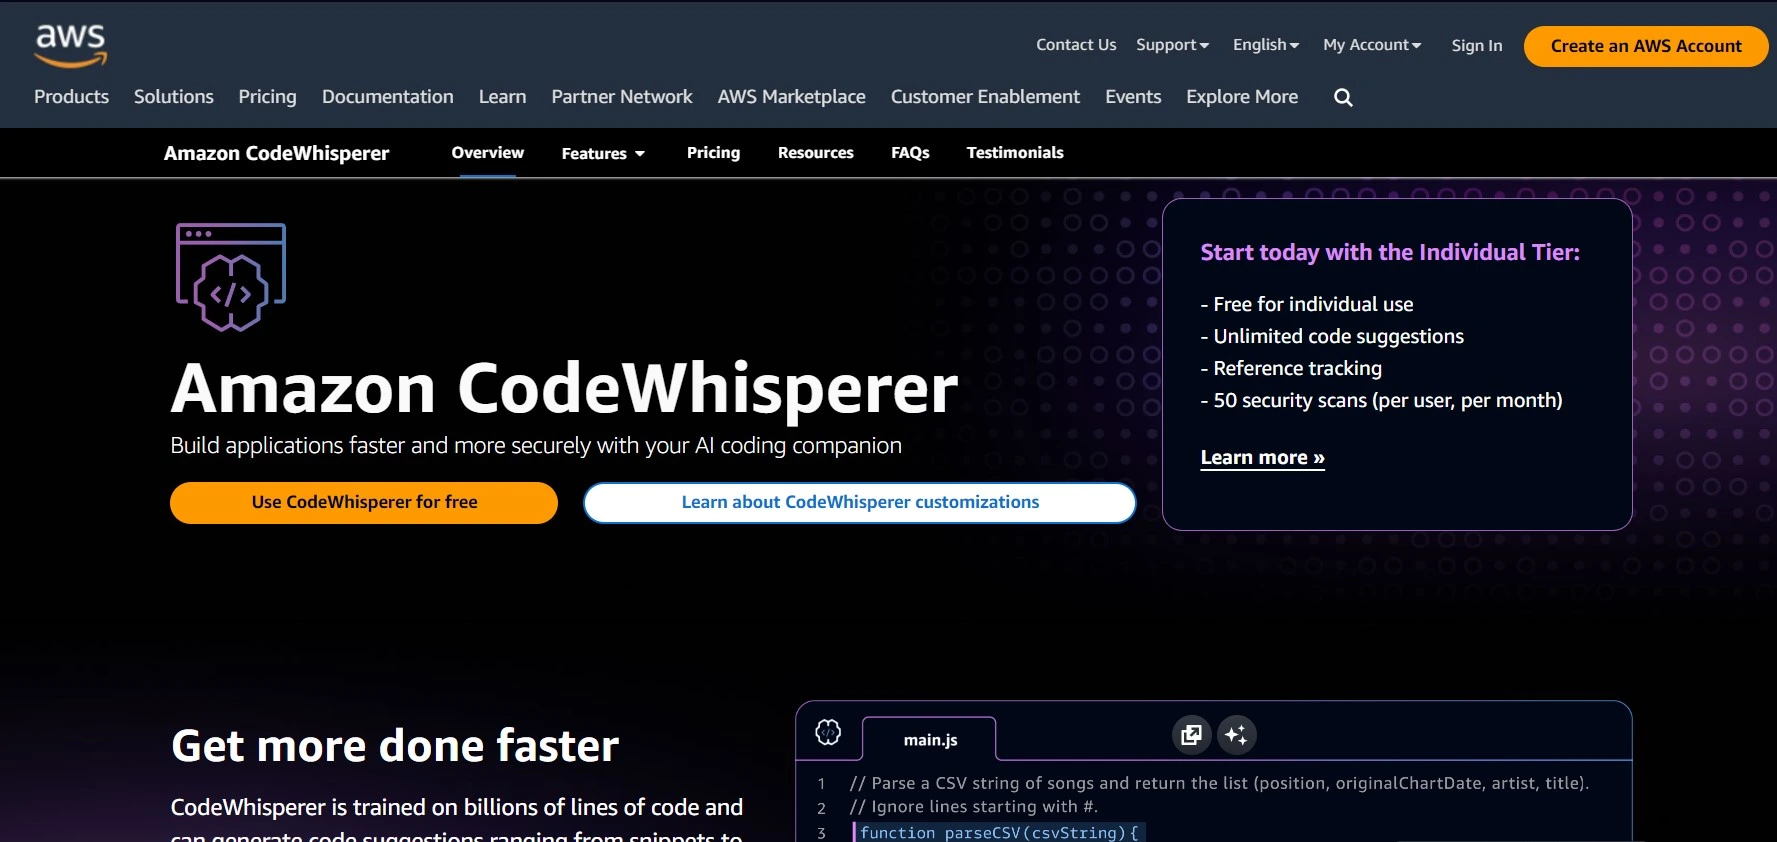 Amazon CodeWhisperer is an AI-powered code generation tool from Amazon Web Service